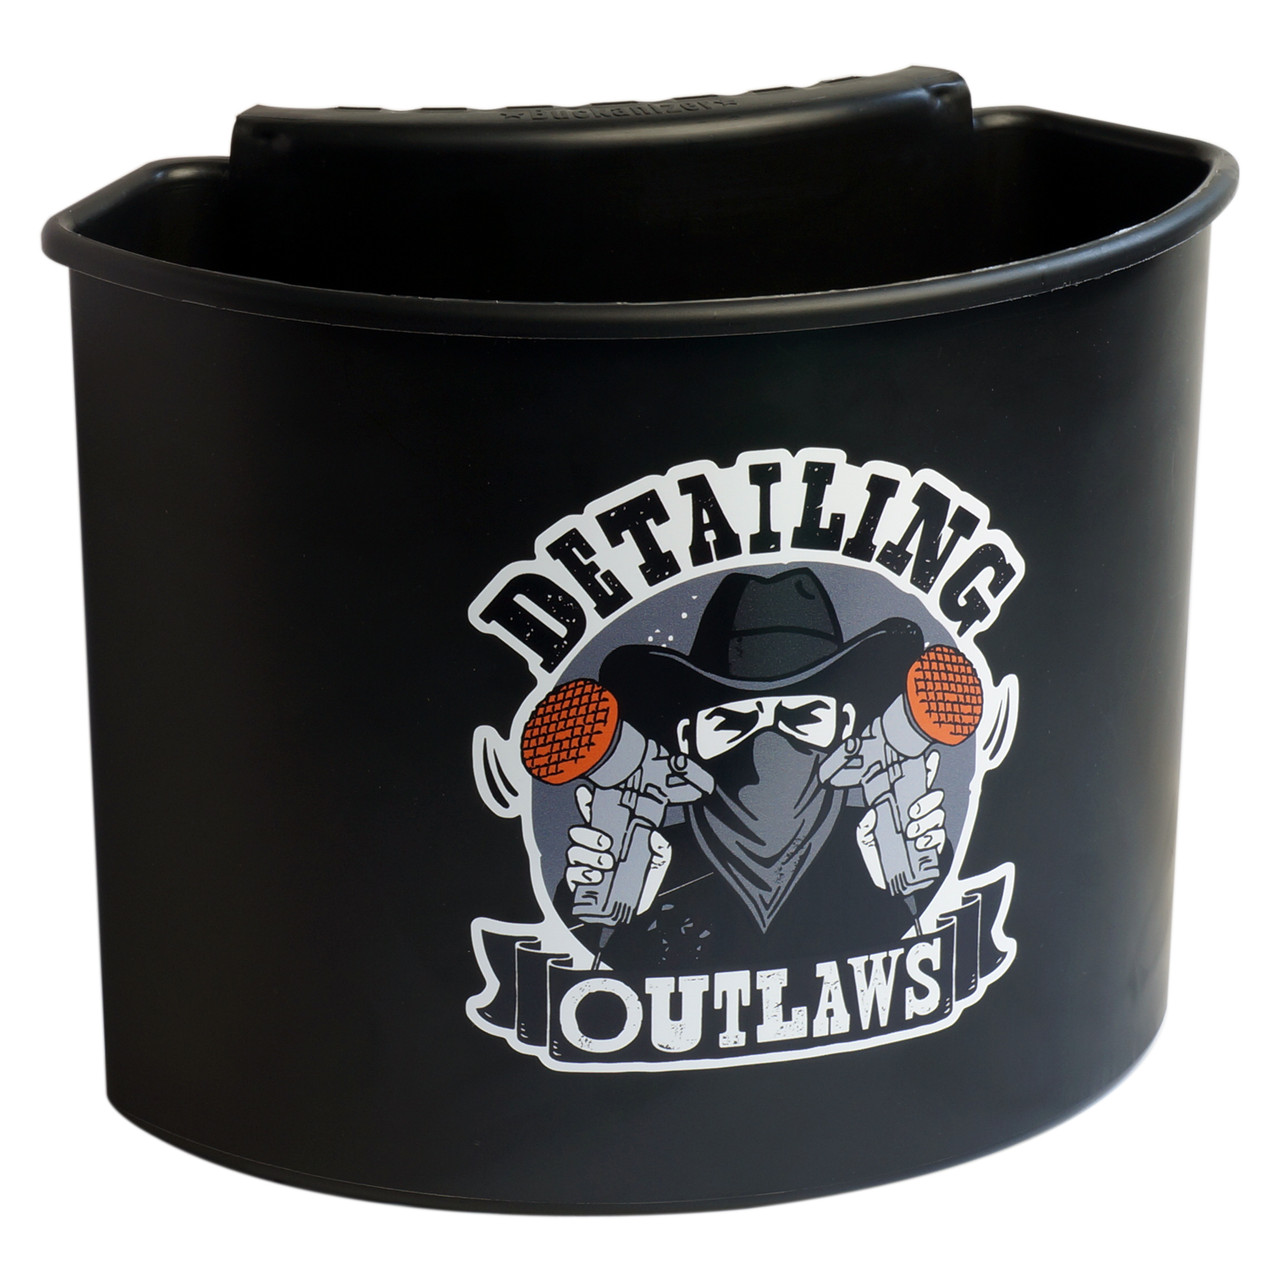 Detailing Outlaws Buckanizer - Black - Skys The Limit Car Care